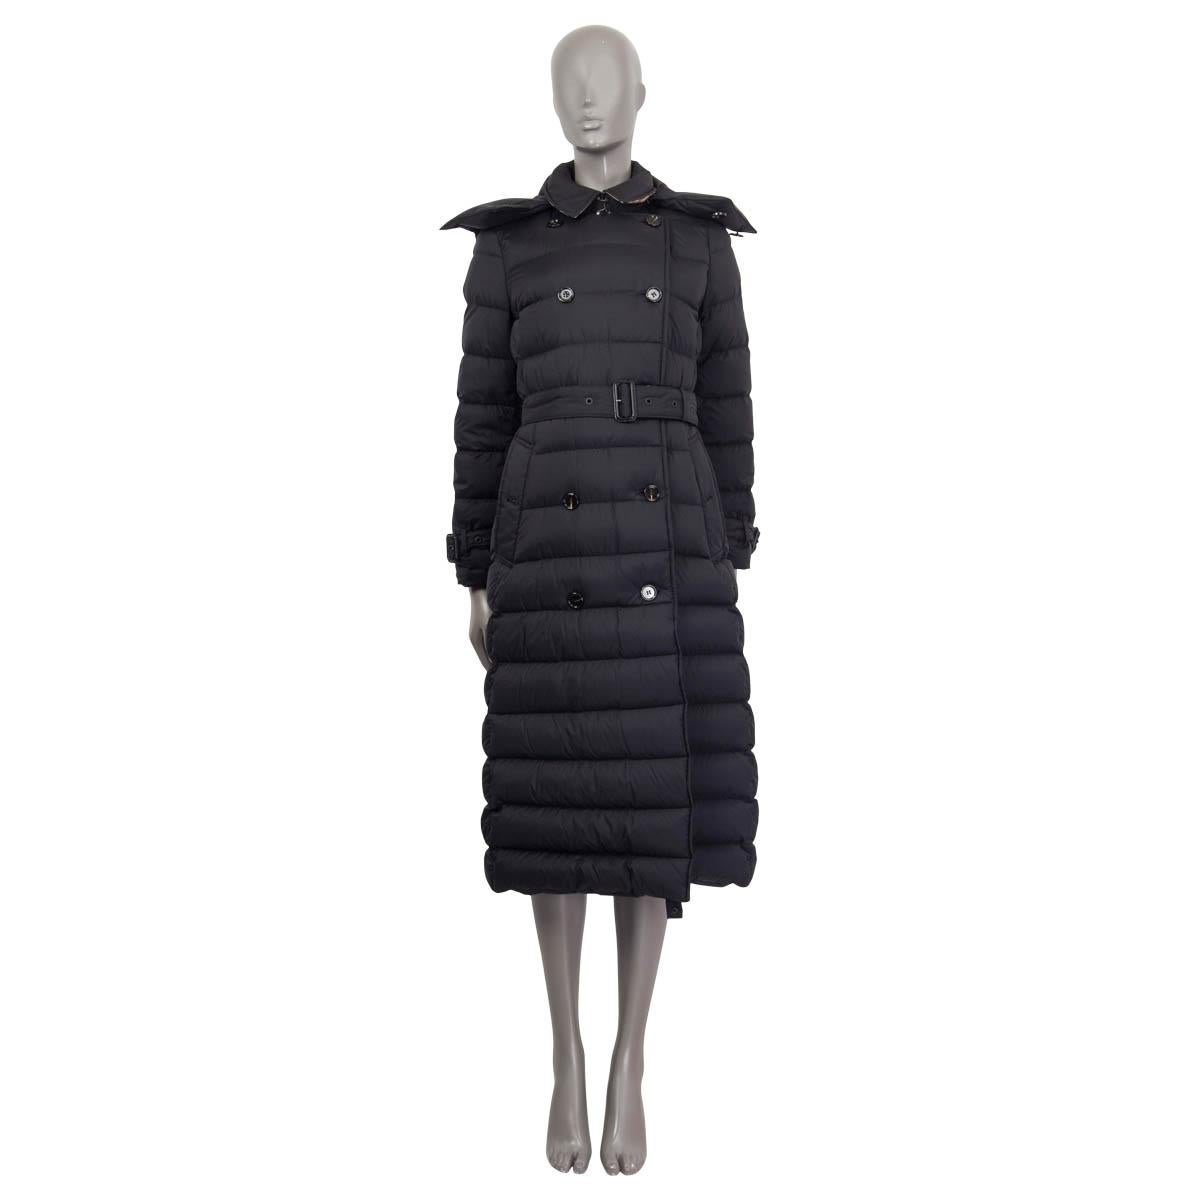 100% authentic Burberry down-filled puffer coat in black polyamide (100%). Features a detachable drawcord hood, two buttoned pockets, a vintage check undercollar and belted cuffs. Opens with six buttons and a hook-and-eye collar on the front.